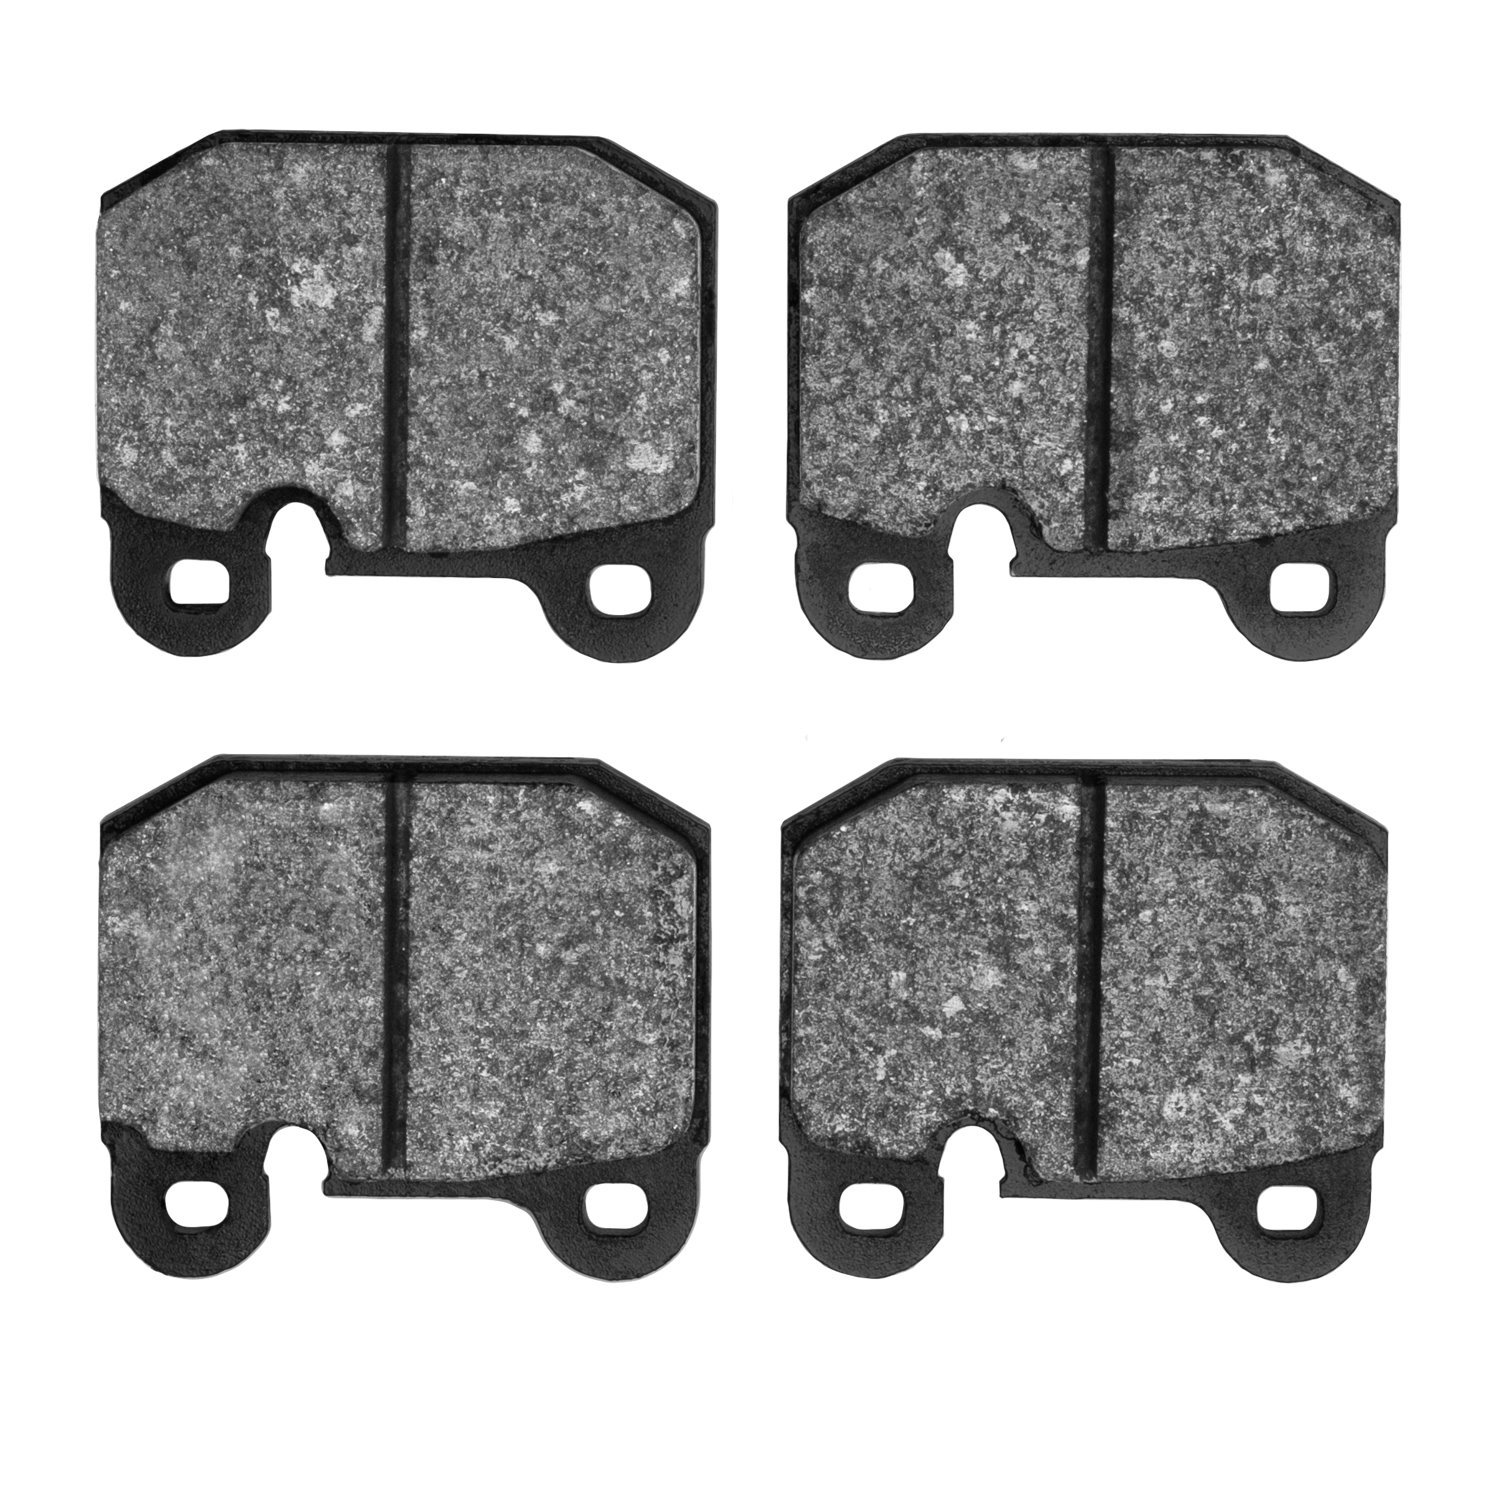 1551-0174-00 5000 Advanced Low-Metallic Brake Pads, 1974-2011 Multiple Makes/Models, Position: Front